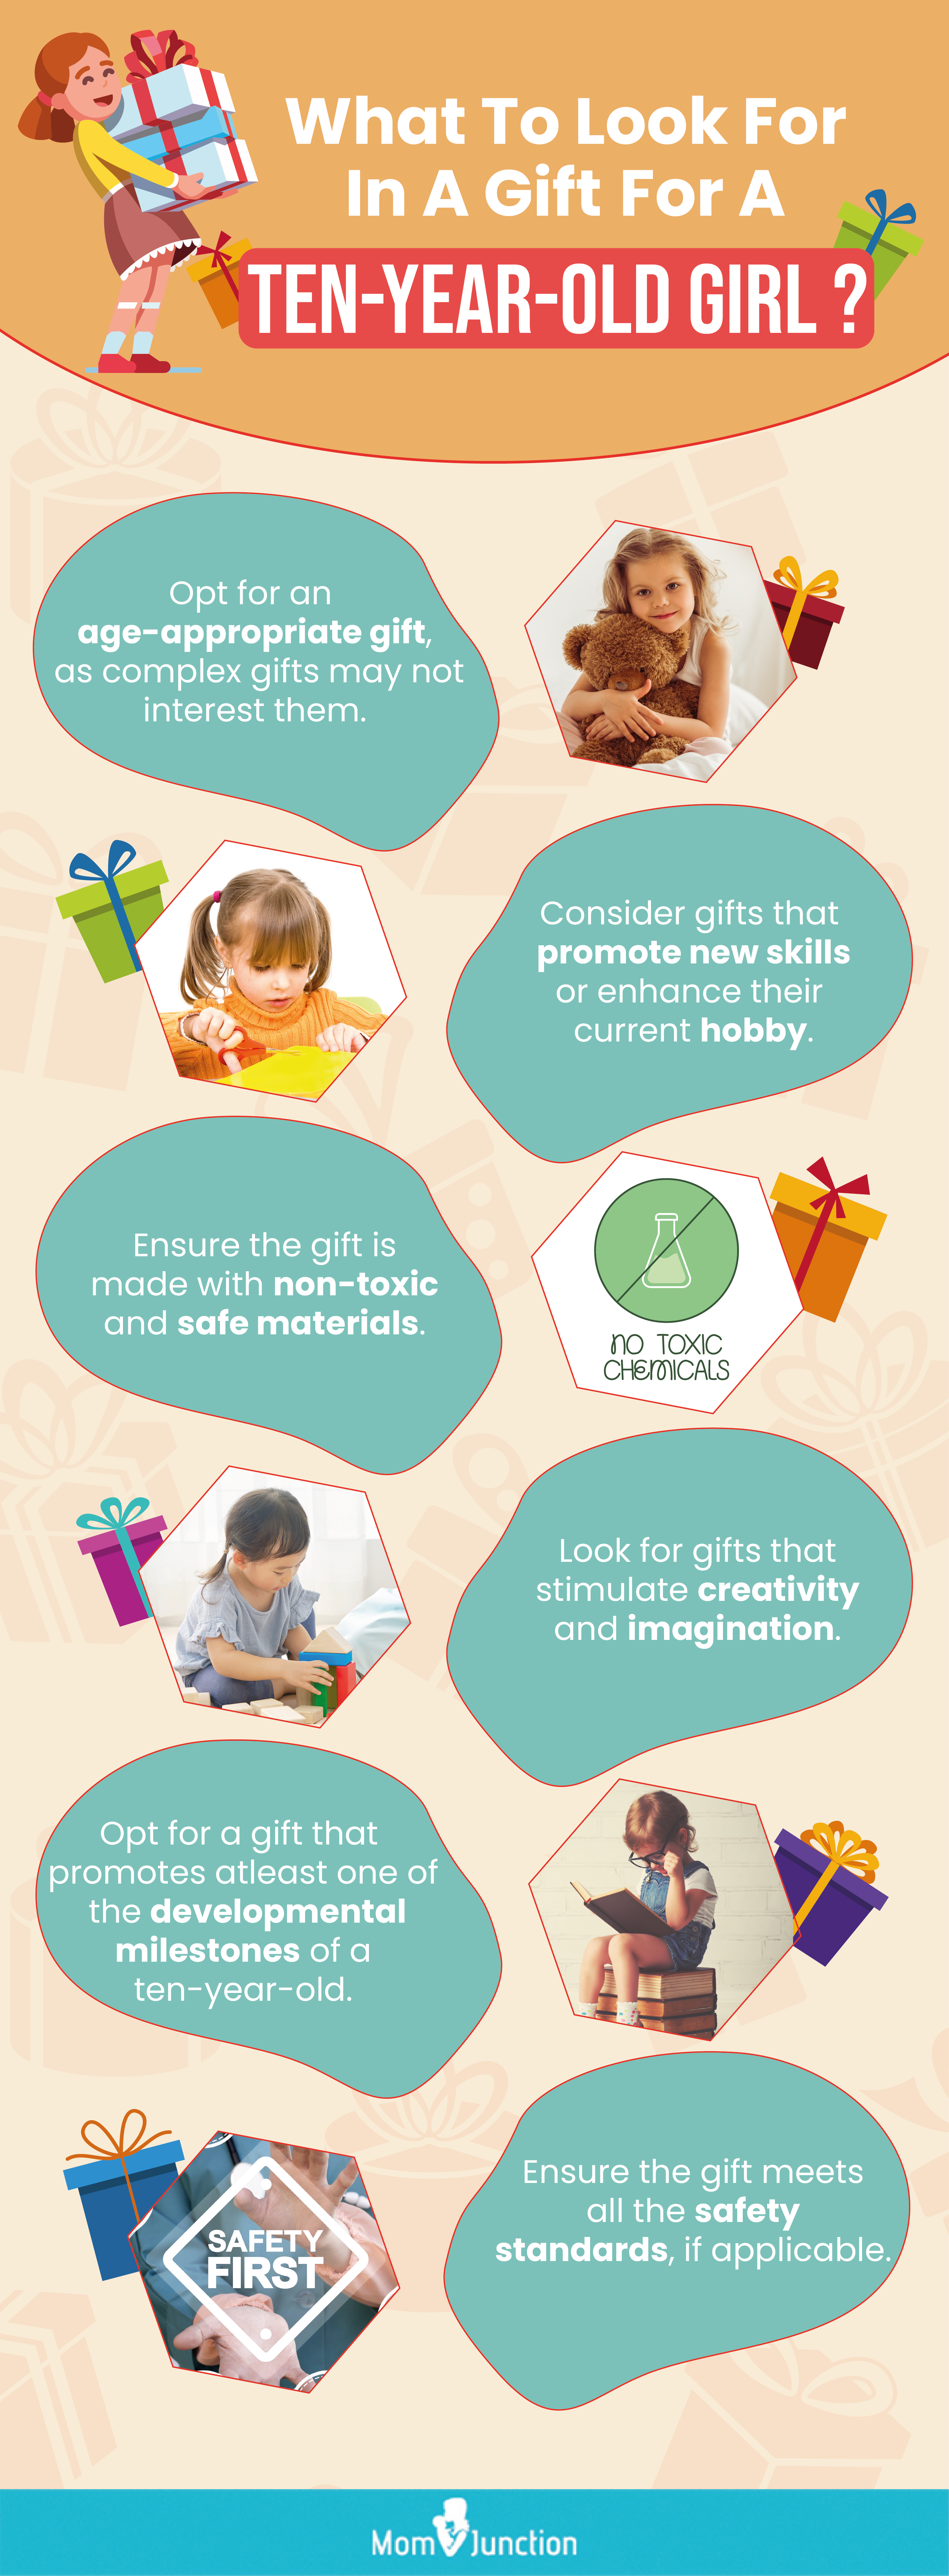 What To Look For In A Gift For A Ten-YearOld Girl (infographic)